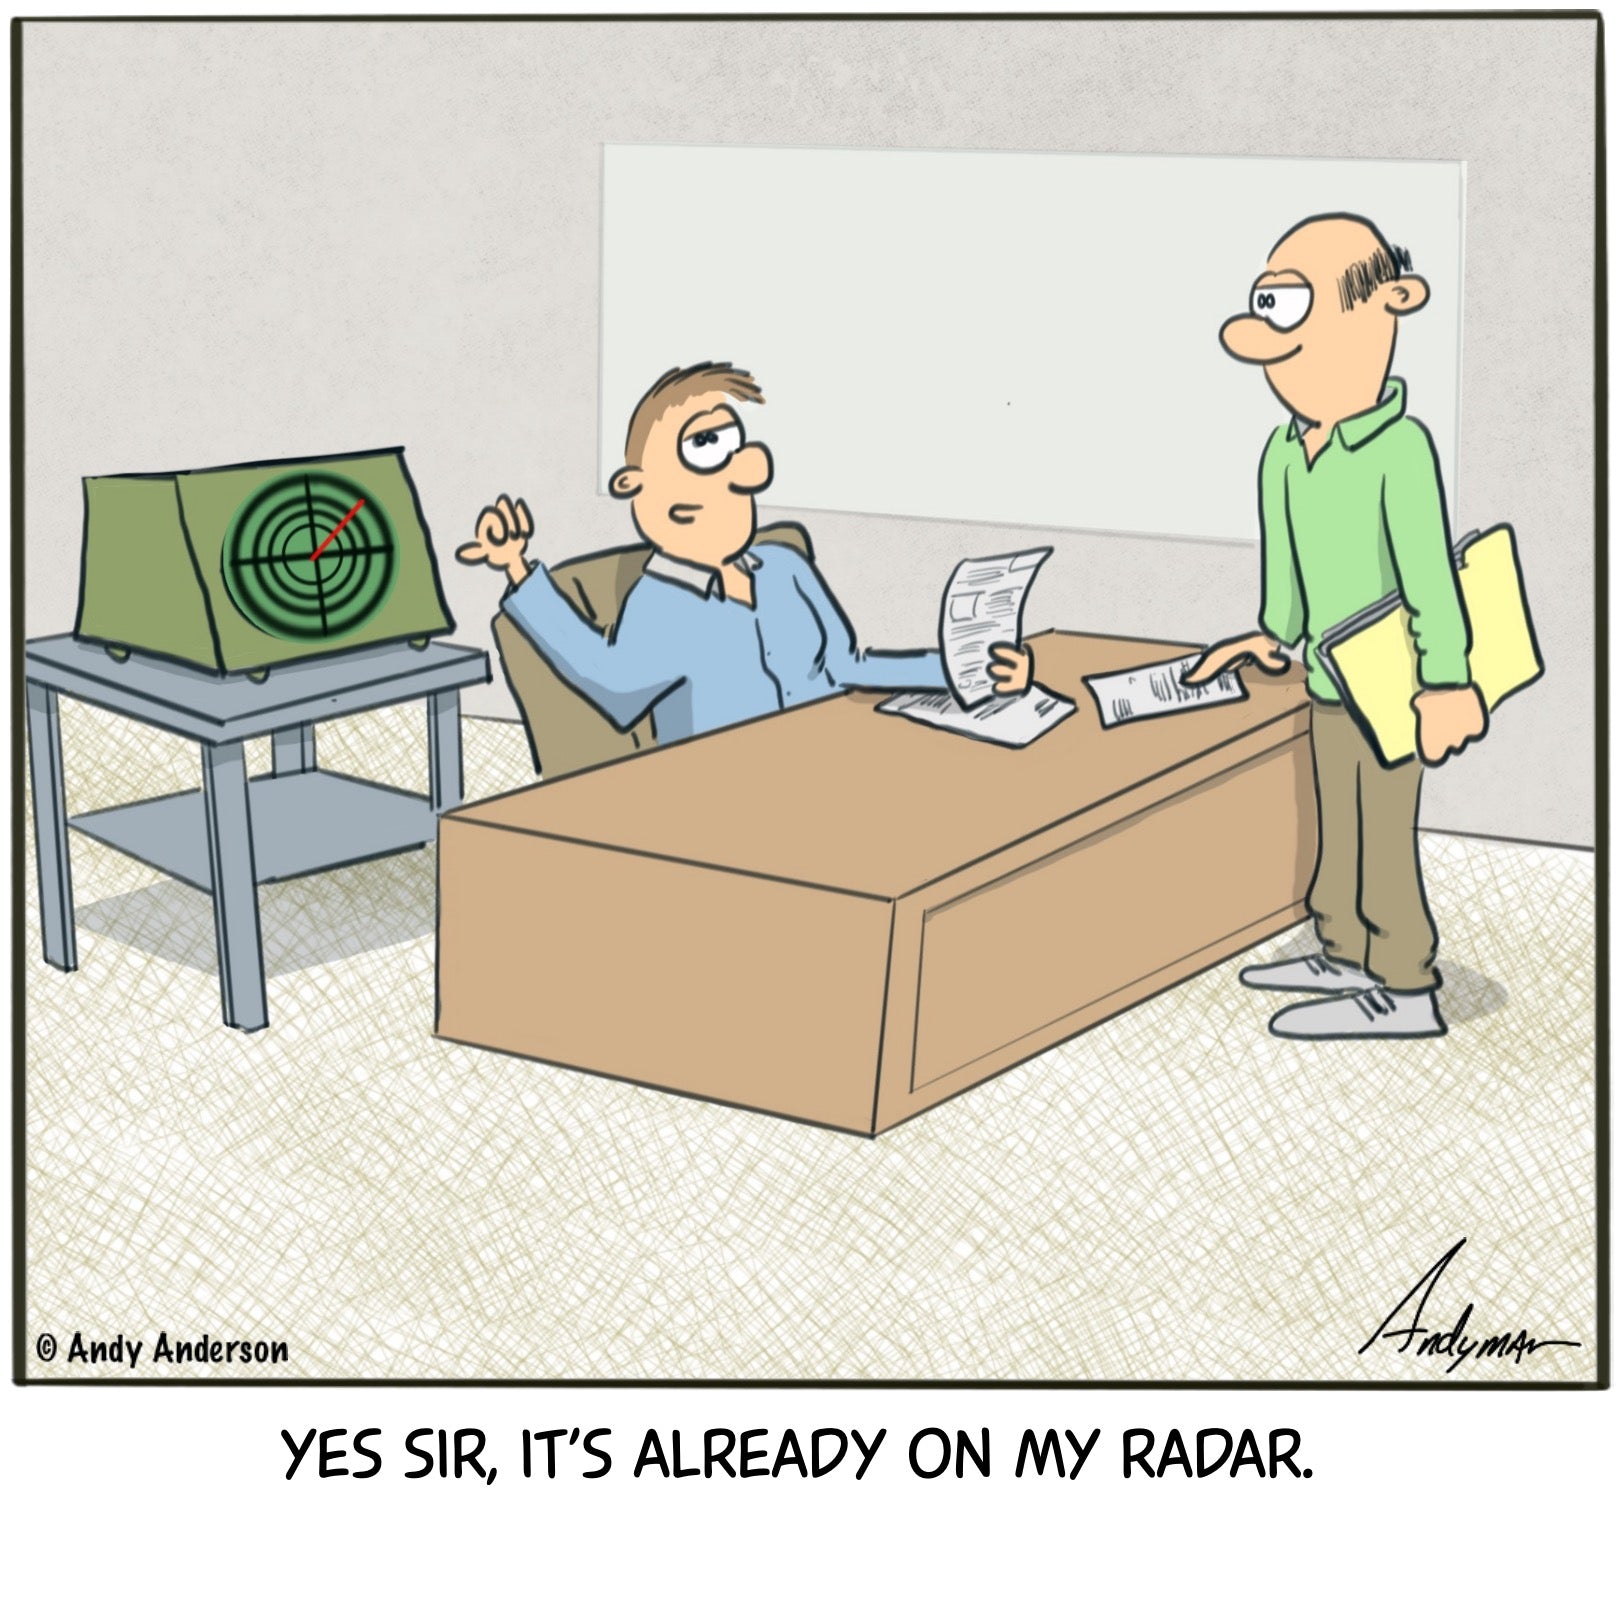 Cartoon about an employee telling his boss that it's already on his radar 